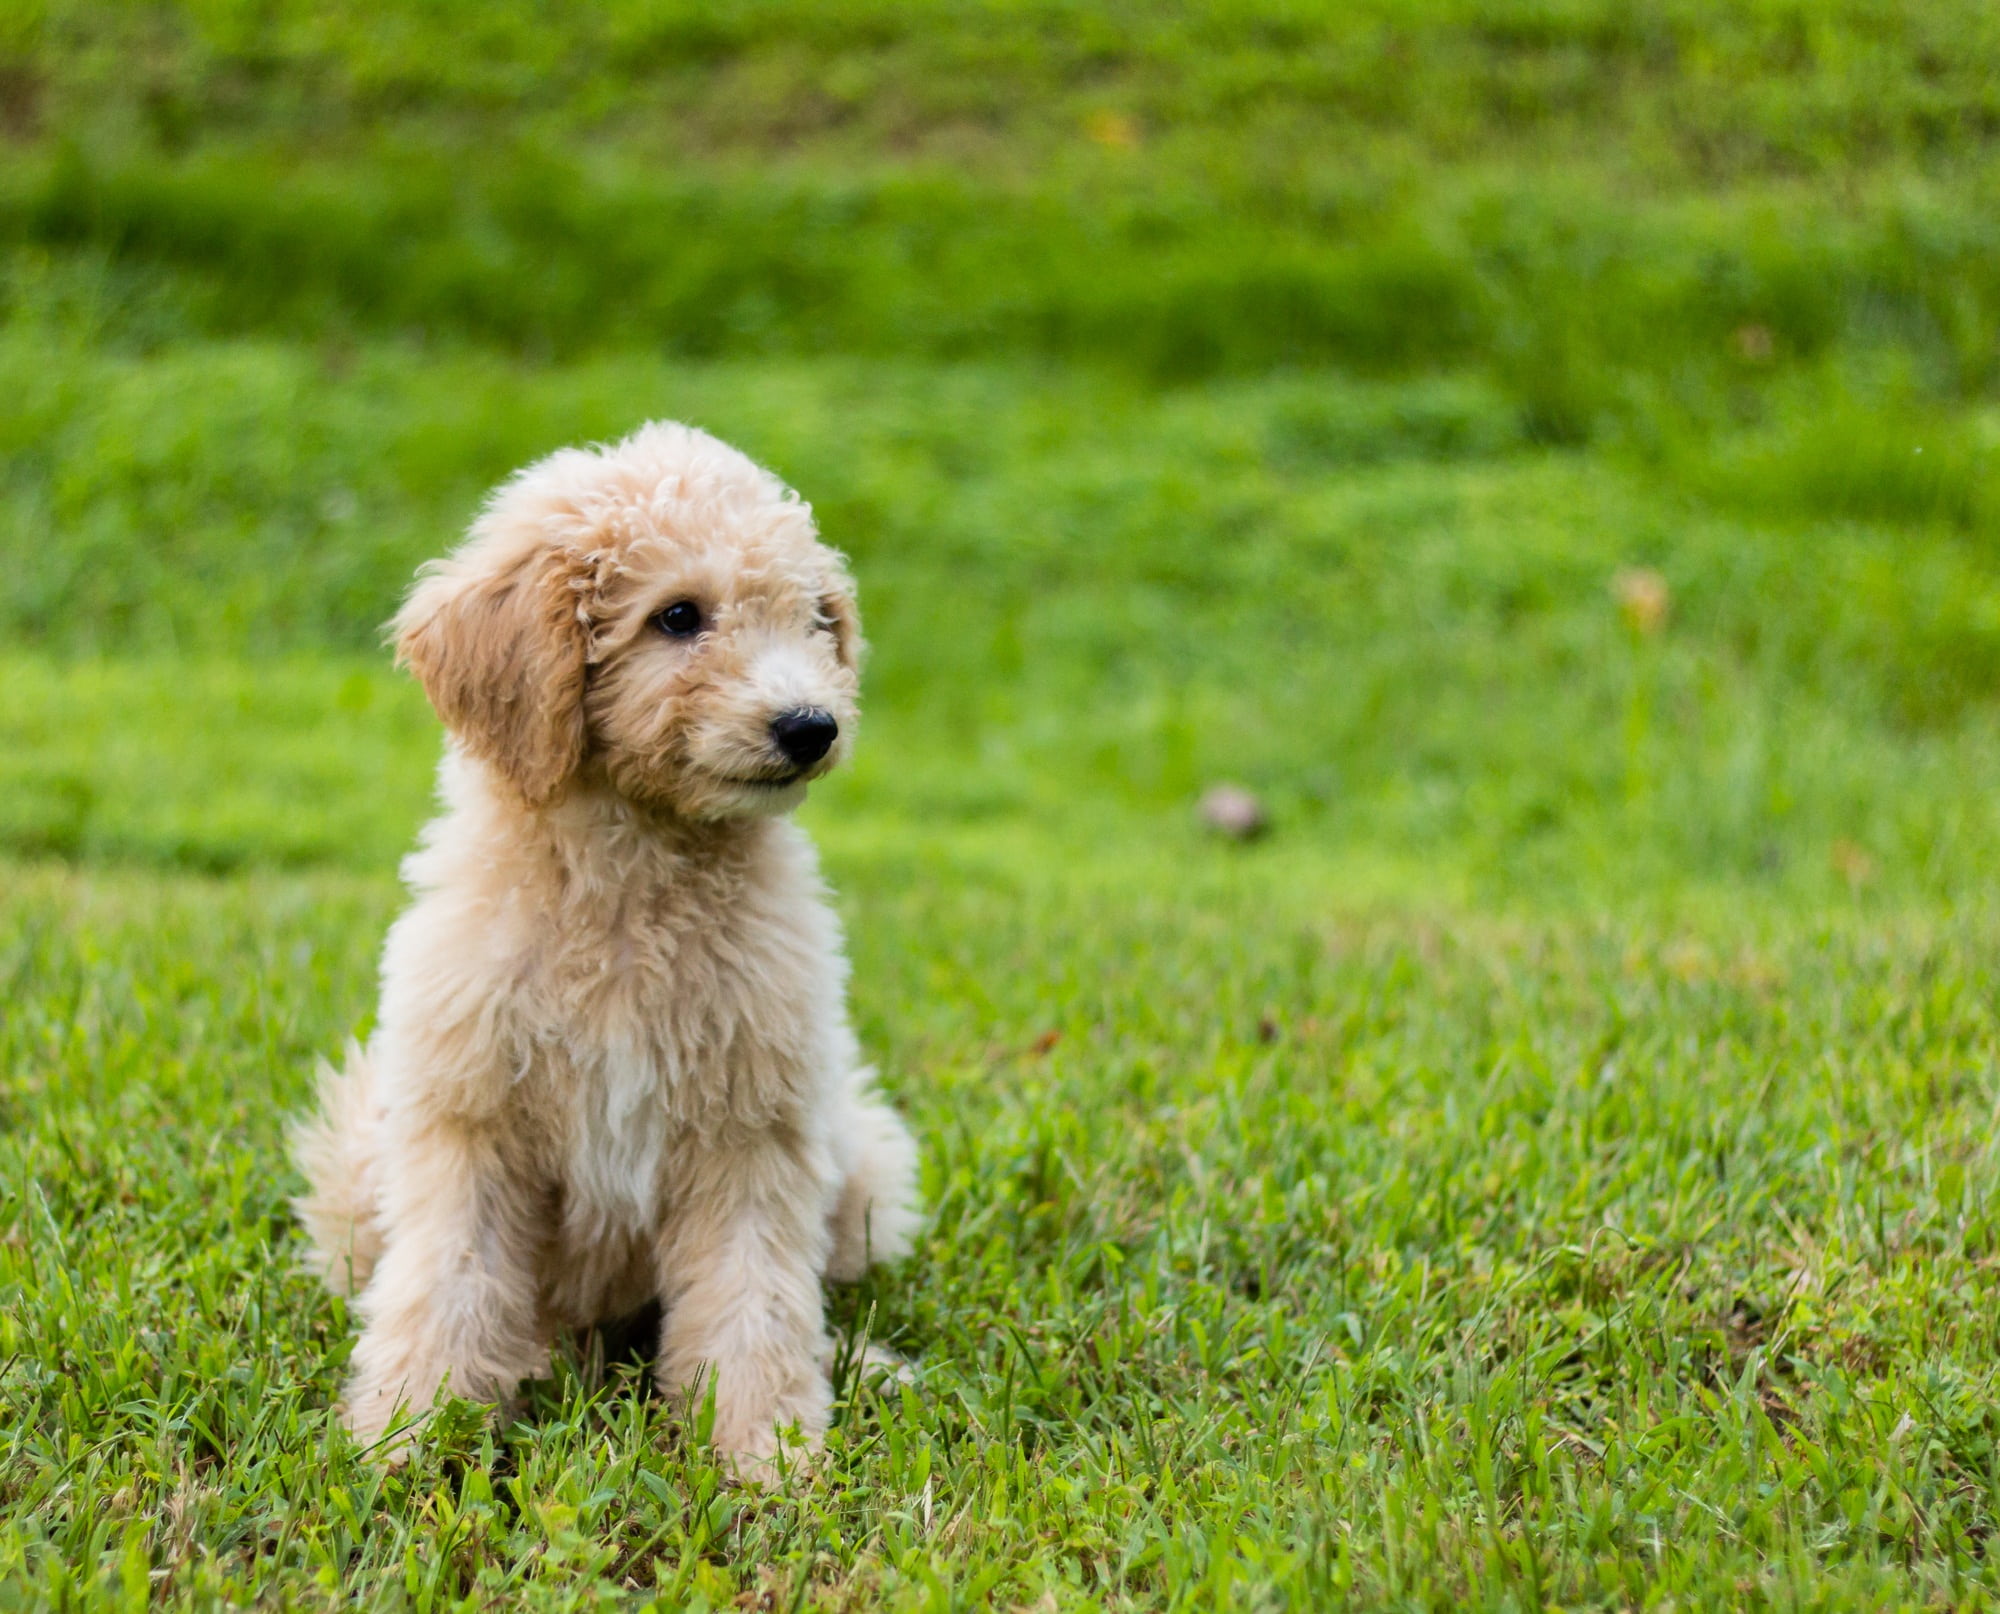 goldendoodle, puppy, cute, animal, green grass, dog, pet, outdoors